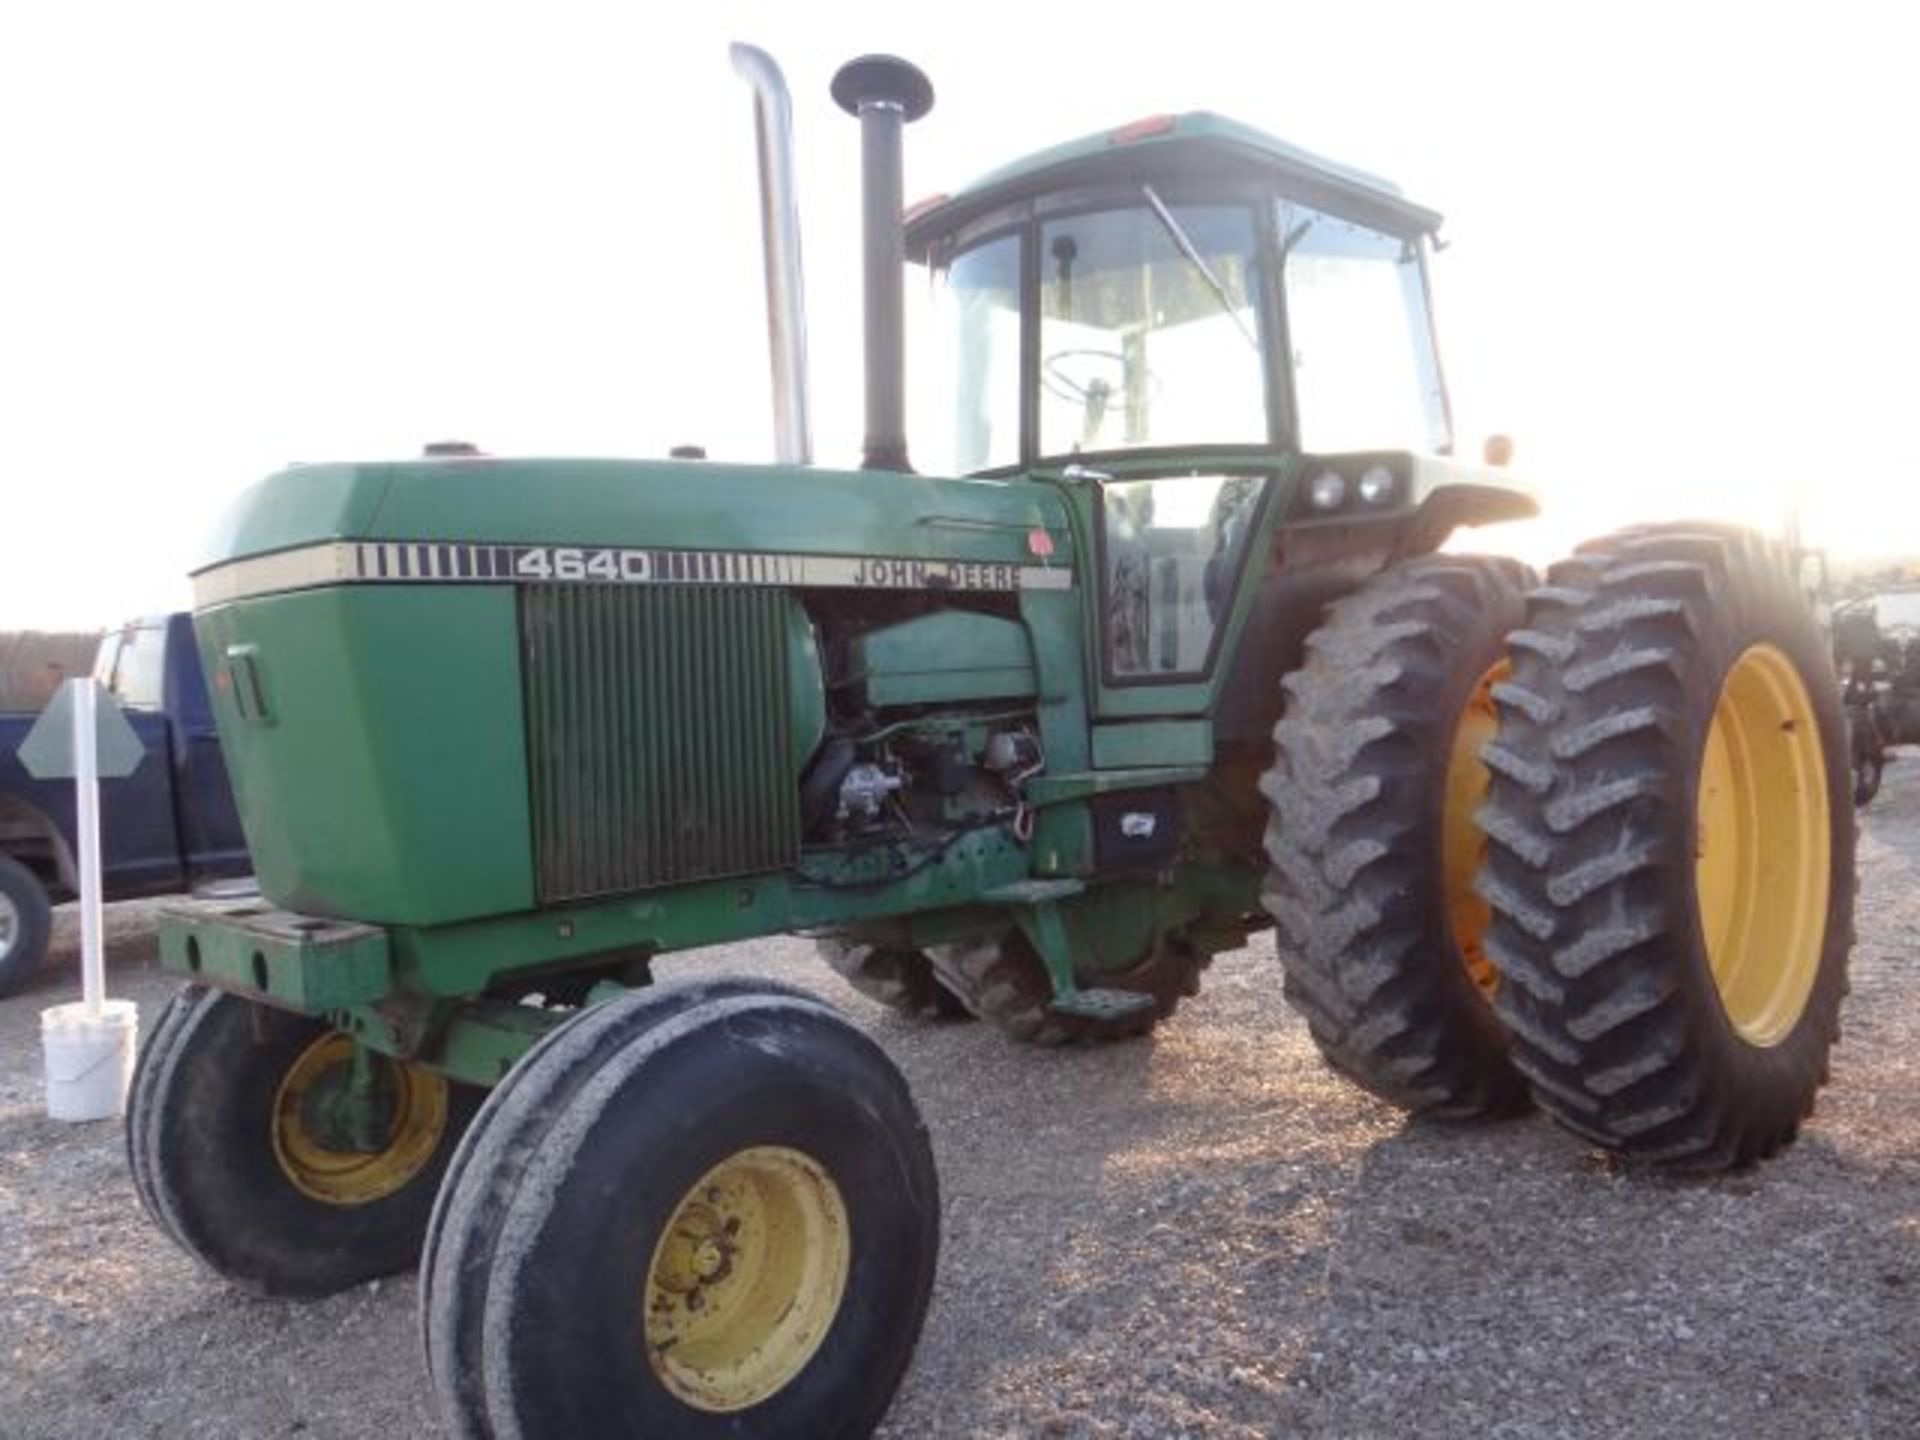 1981 JD 4640 Tractor 9330 hrs, 160-180hp, 3pt Hitch, 3 SCV, sn# 4640H023975RW